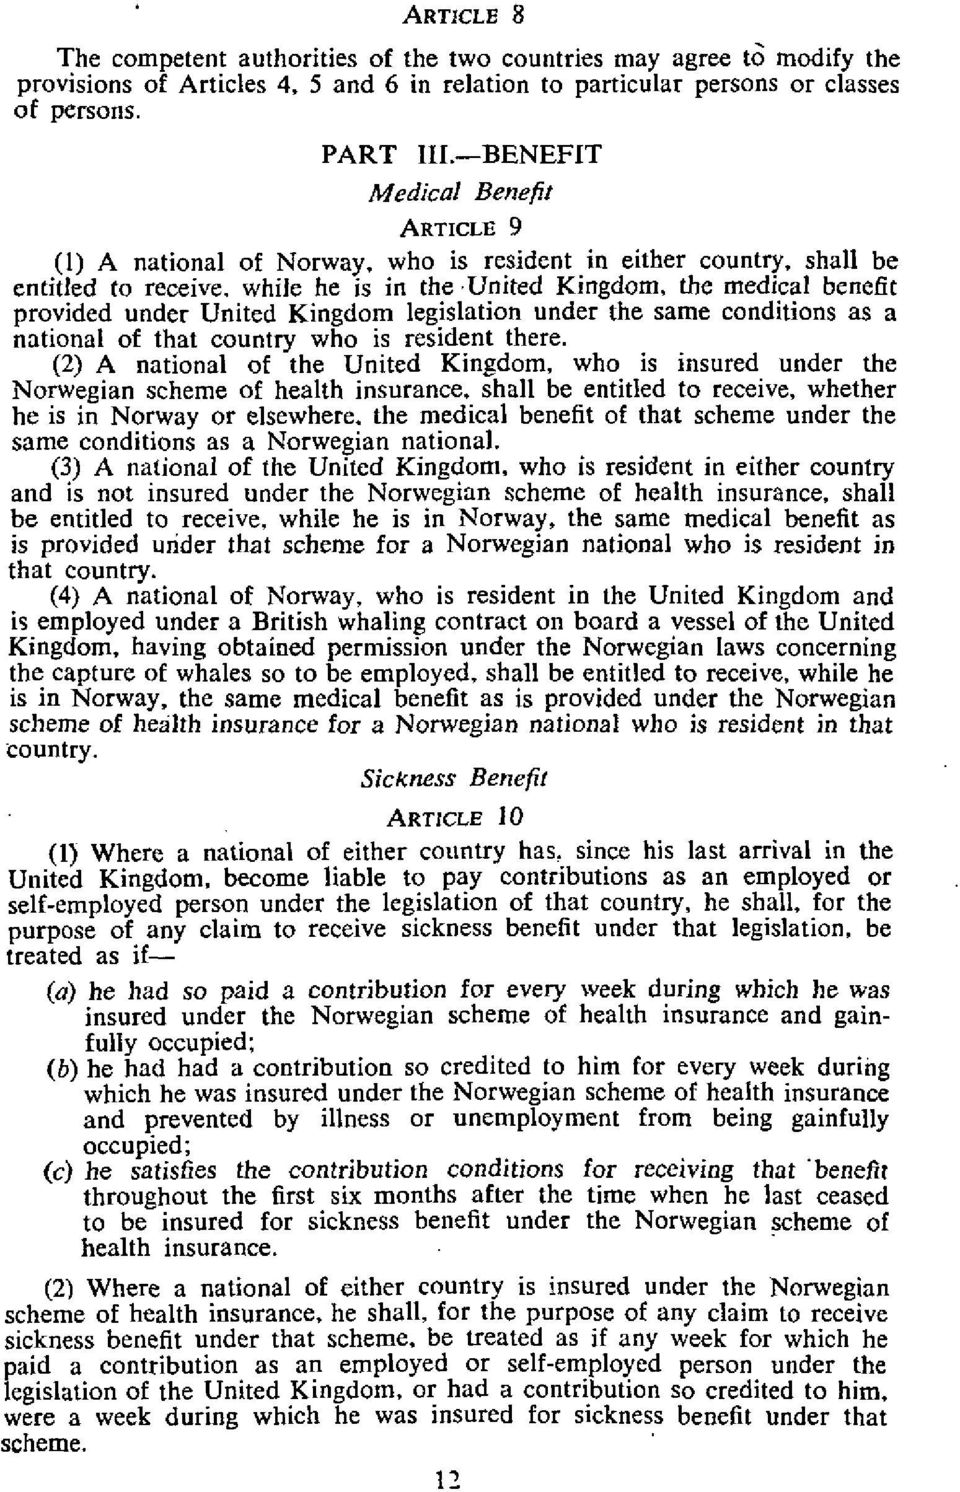 United Kingdom legislation under the same conditions as a national of that country who is resident there.